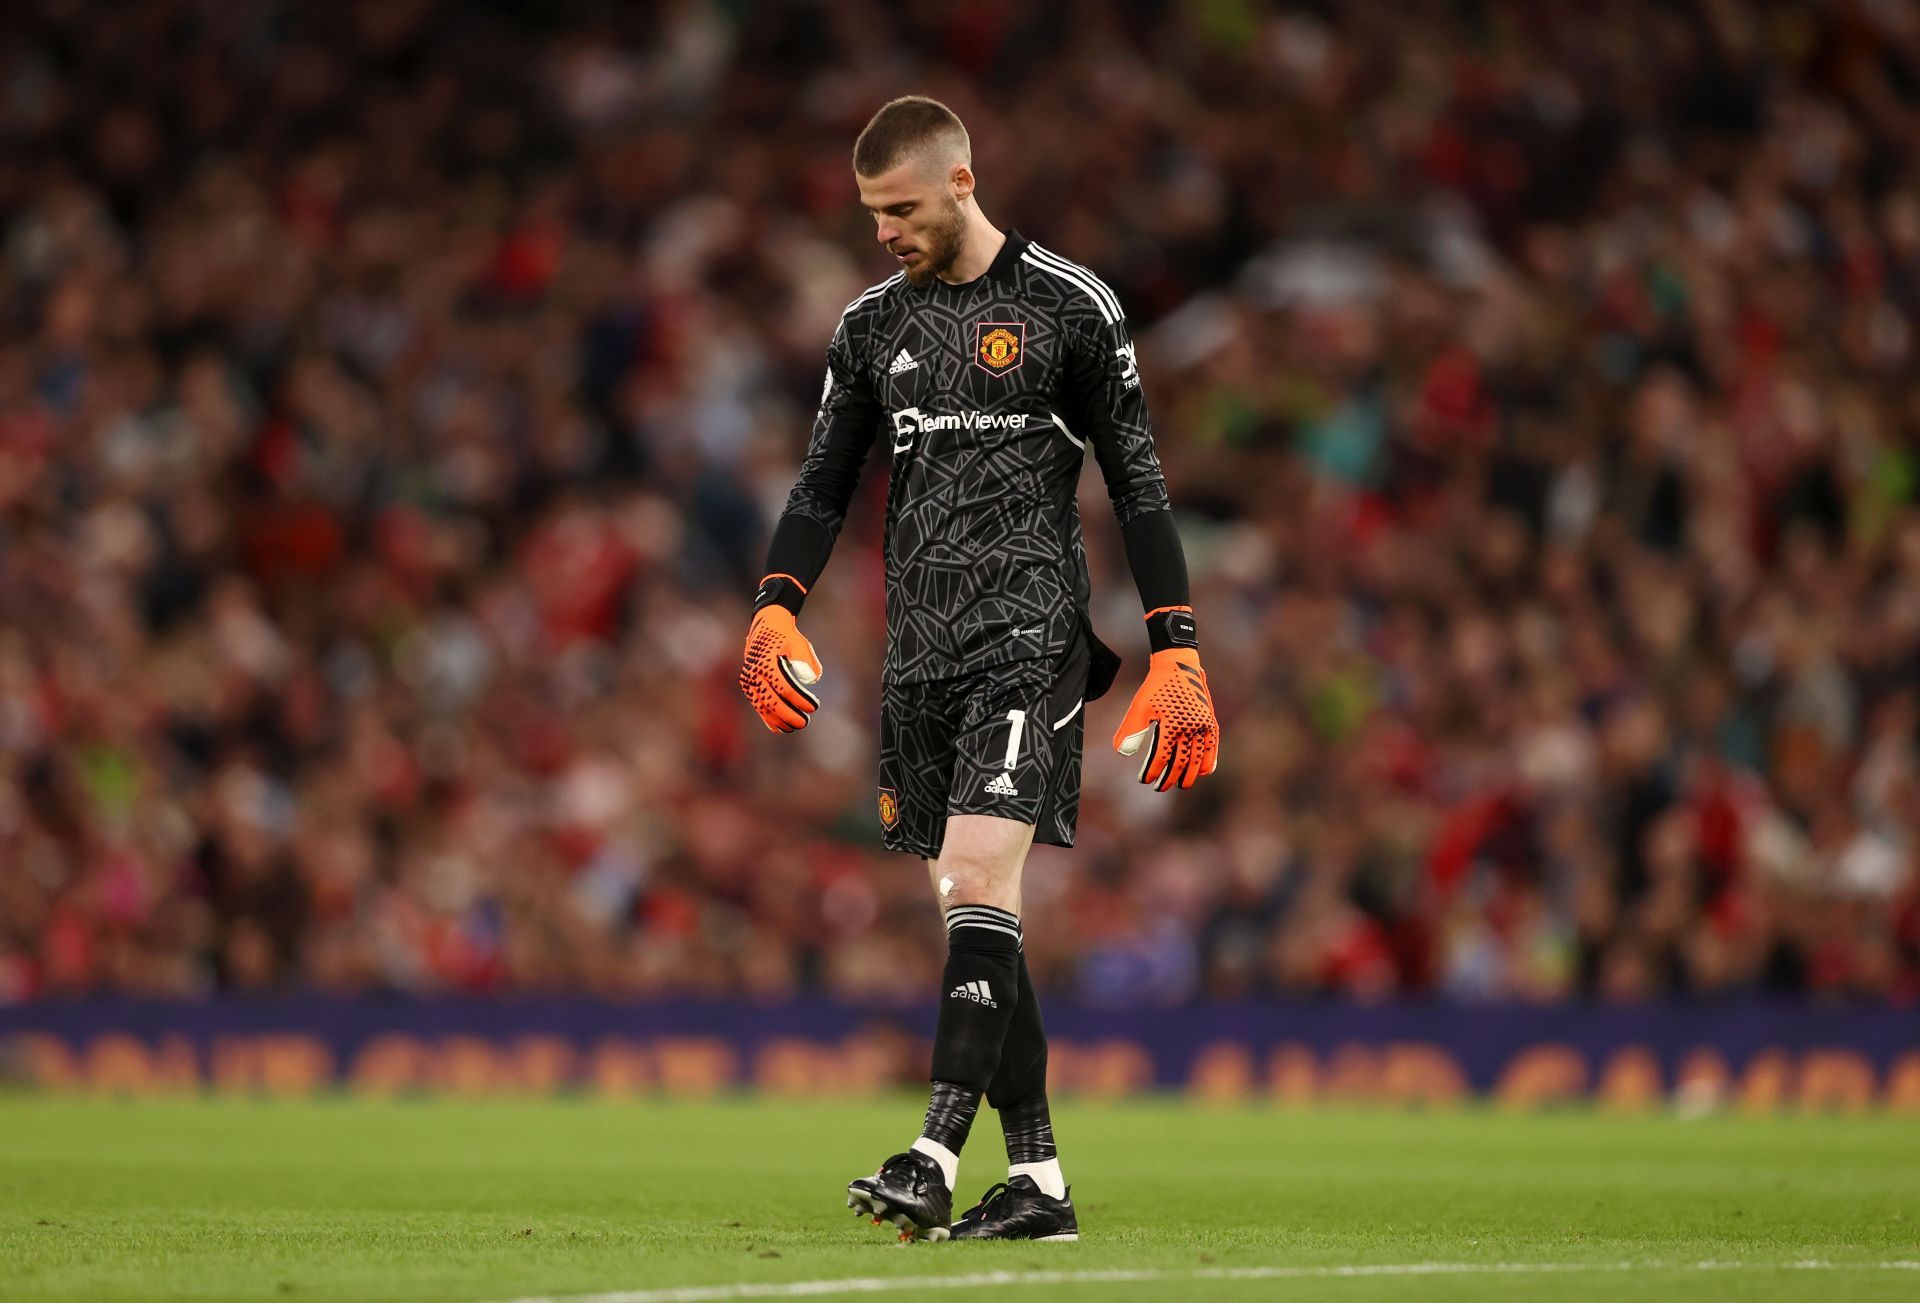 De Gea is currently a free agent.